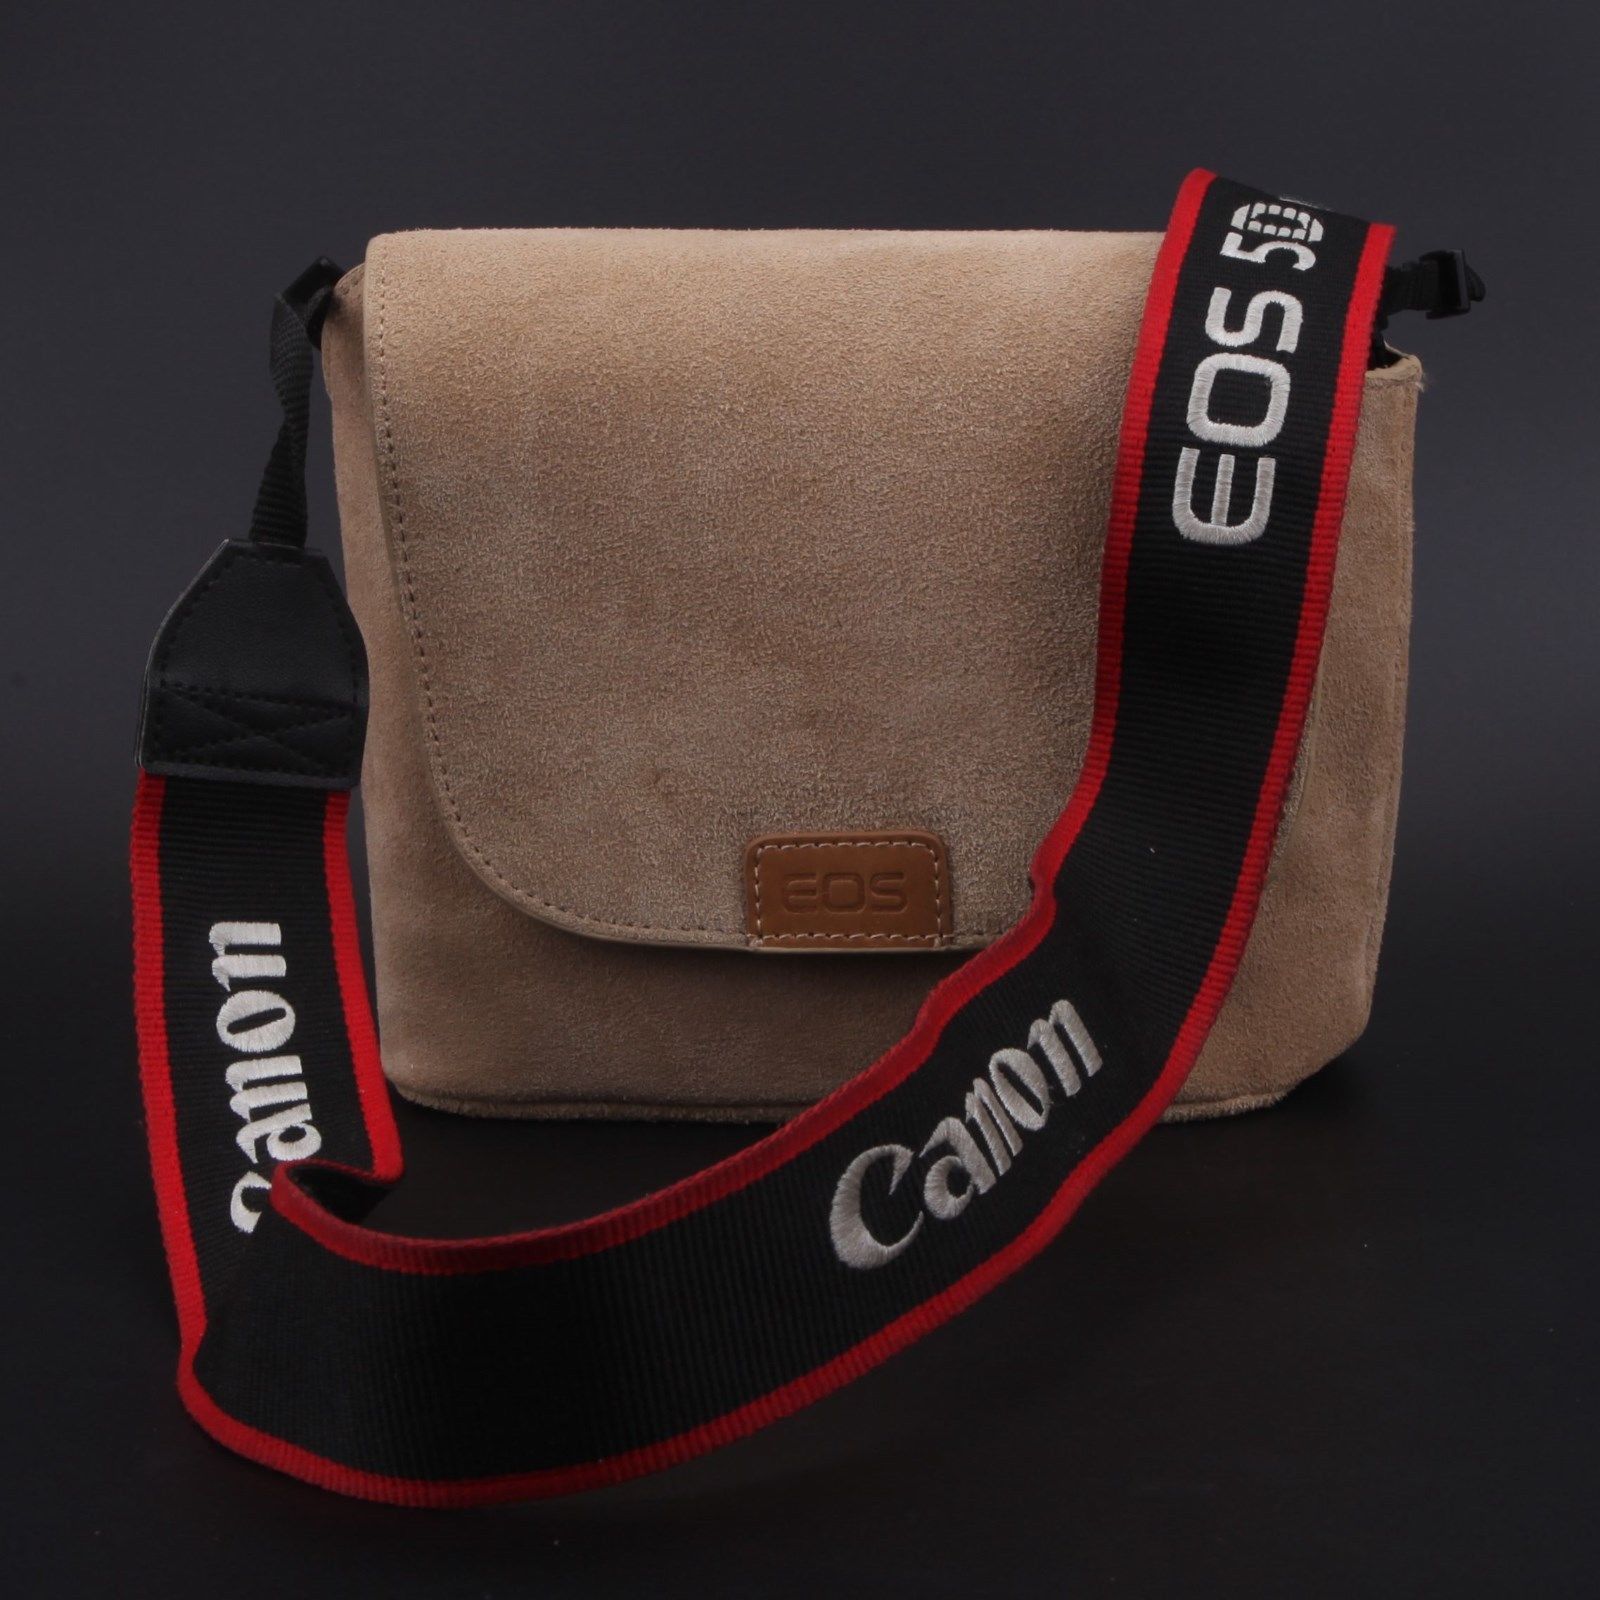 Original Canon EOS DSLR SLR Real LEATHER BODY CASE POUCH COVER BAGs สำหรับ รุ่น 5D2 5D3 BC27286 รูปที่ 1